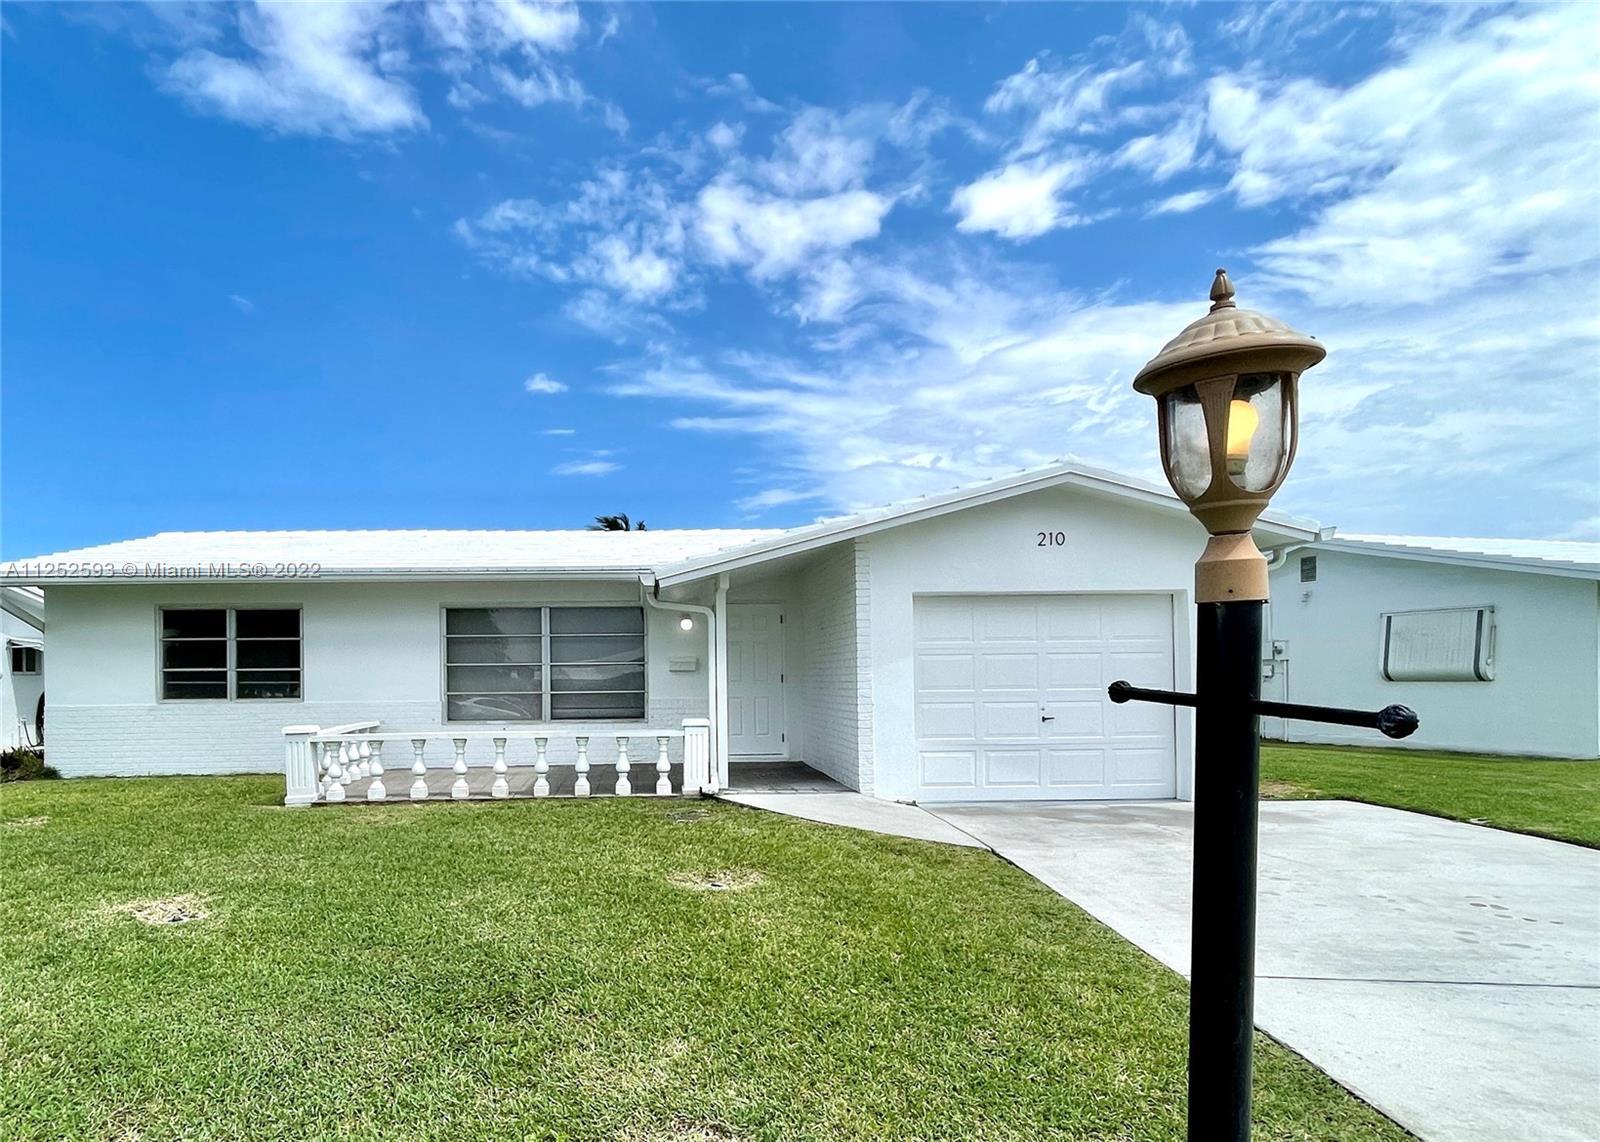 Amazing Home in Pompano Beach Area . Chic and Stylish renovate 2 Bedroom 2 Bathroom perfect for any 